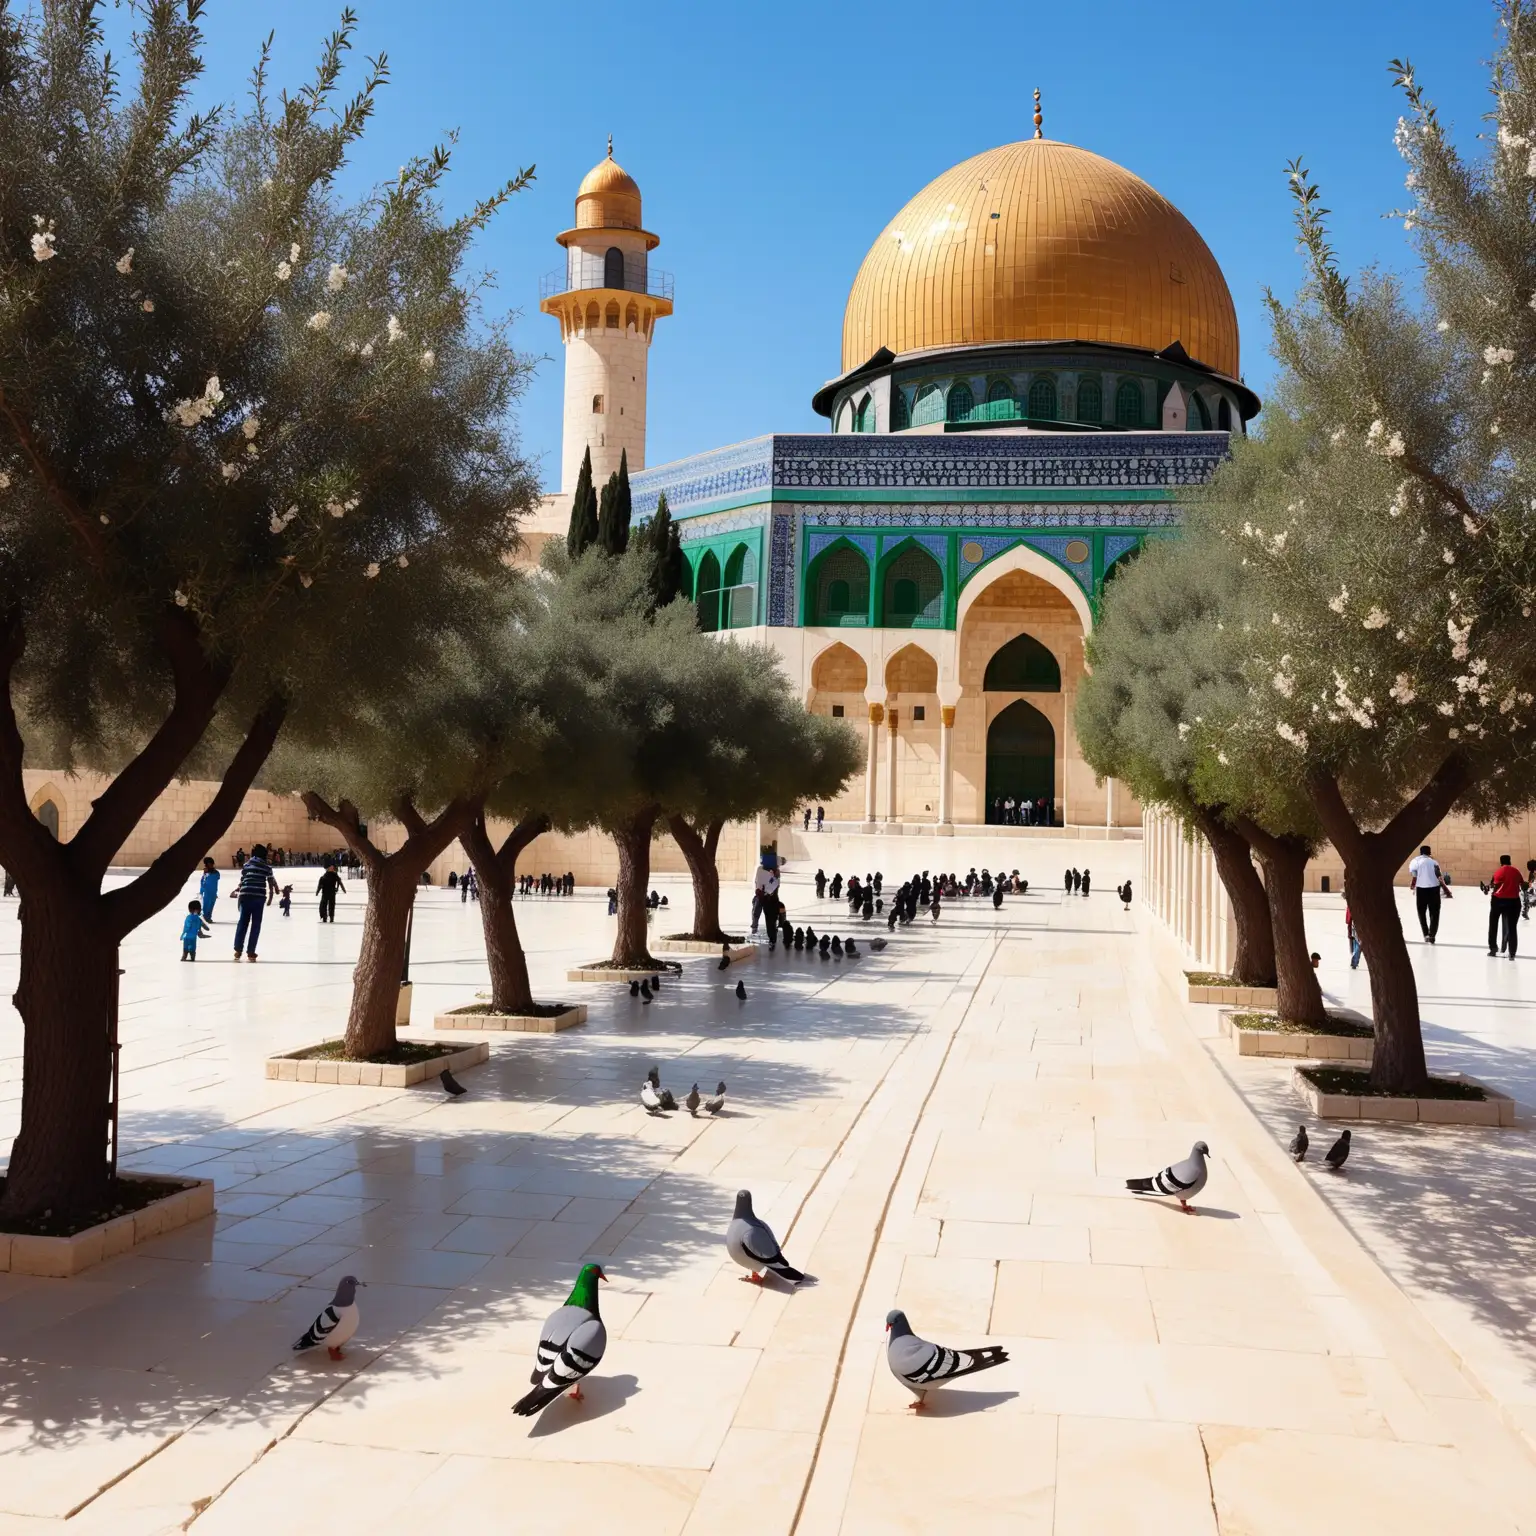 Atmosphere many children of Gaza playing with happiness in Al-Aqsa mosque, heavenly, some pigeons, beautiful olive trees, spring, flowers, slide, twist.